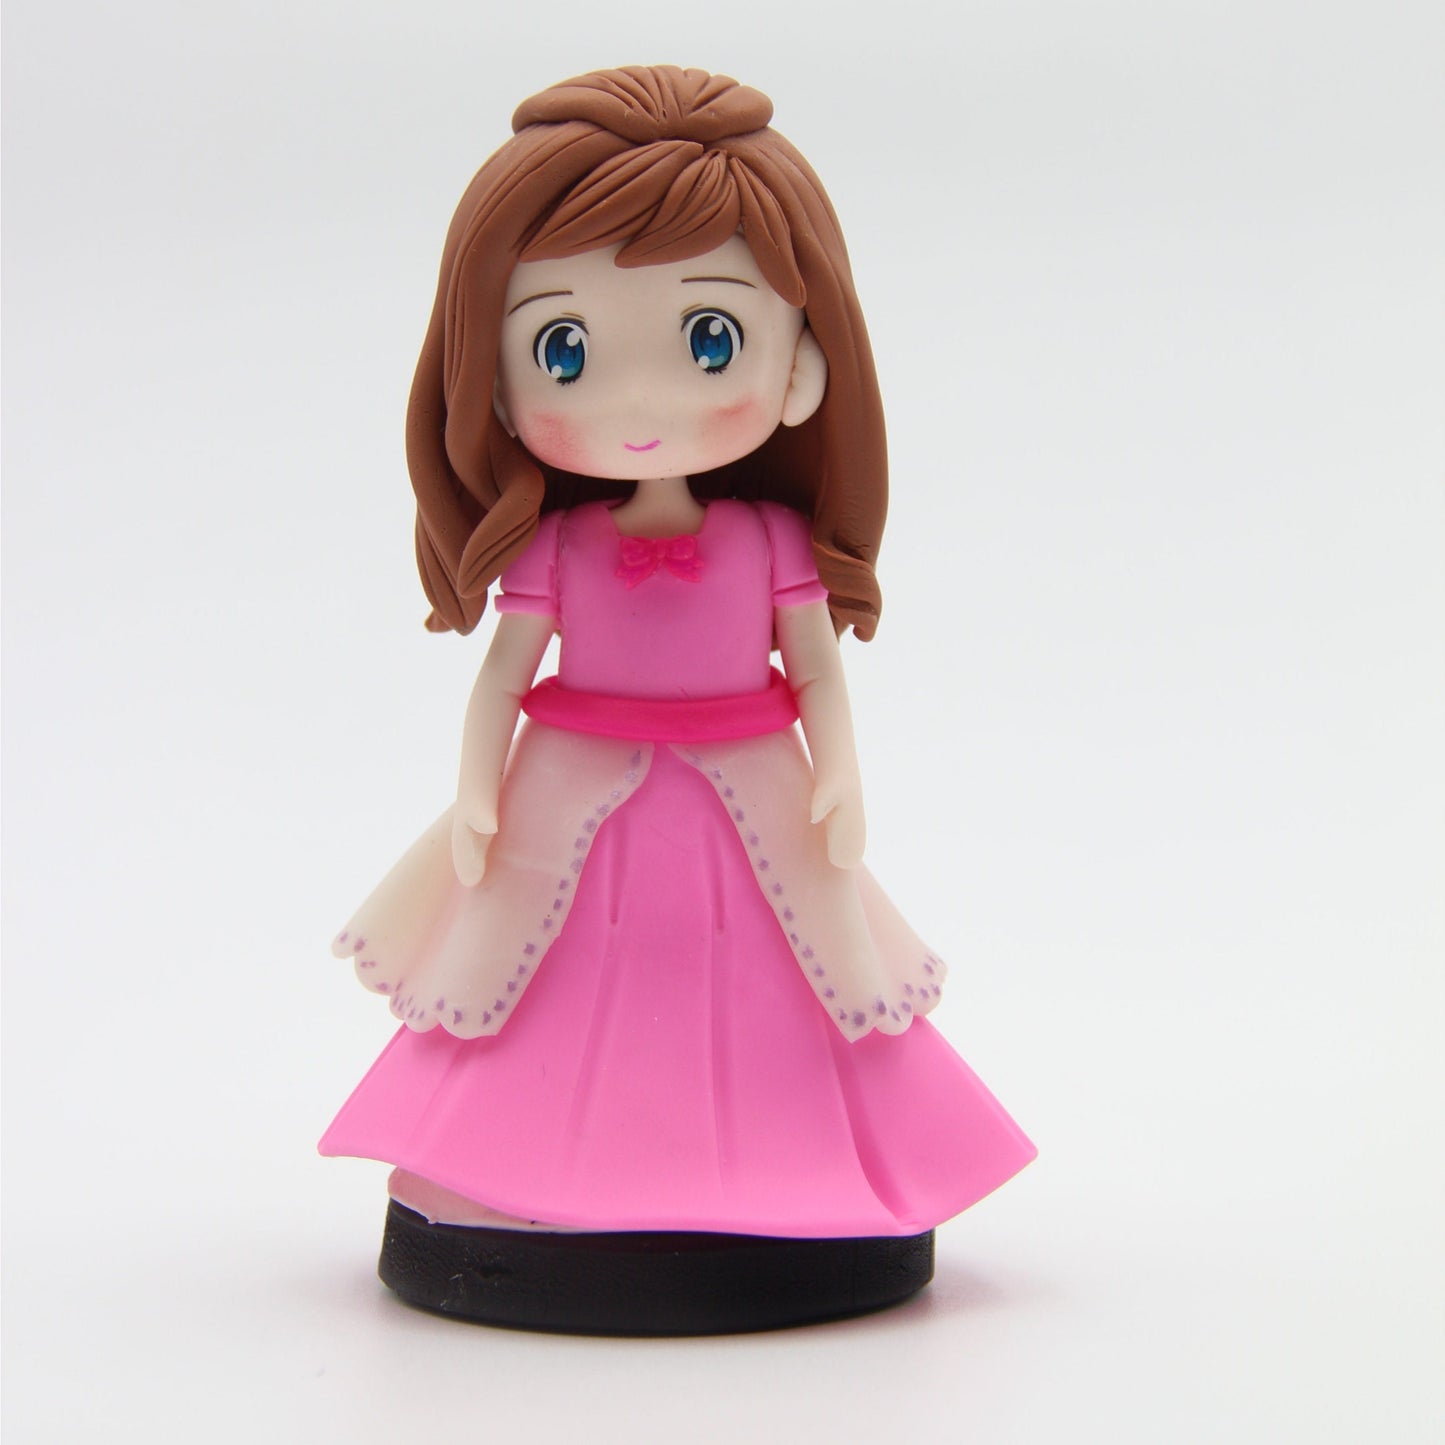 Custom made air dry clay figurine cake topper for weddings, birthdays and special occasions